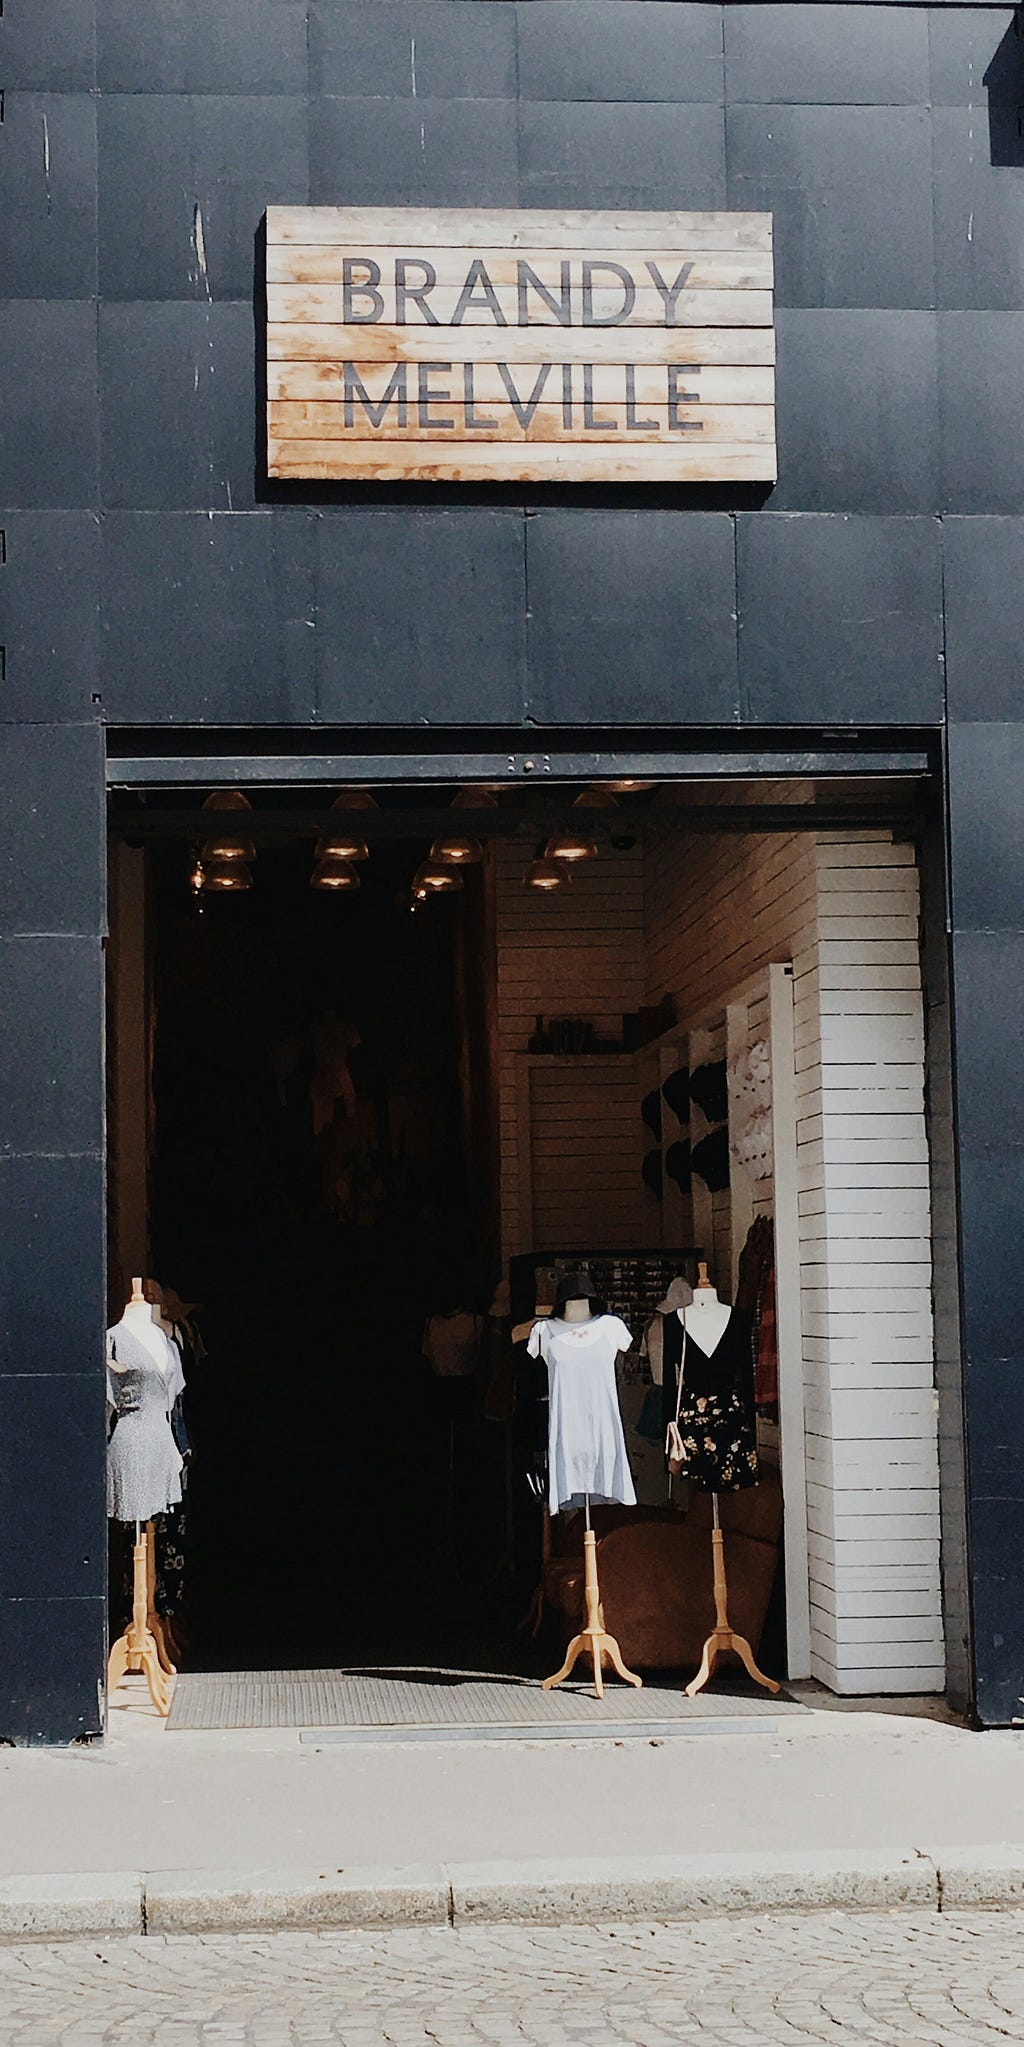 Image of the front of a Brandy Melville store, complete with sign and mannequins with clothed in store items